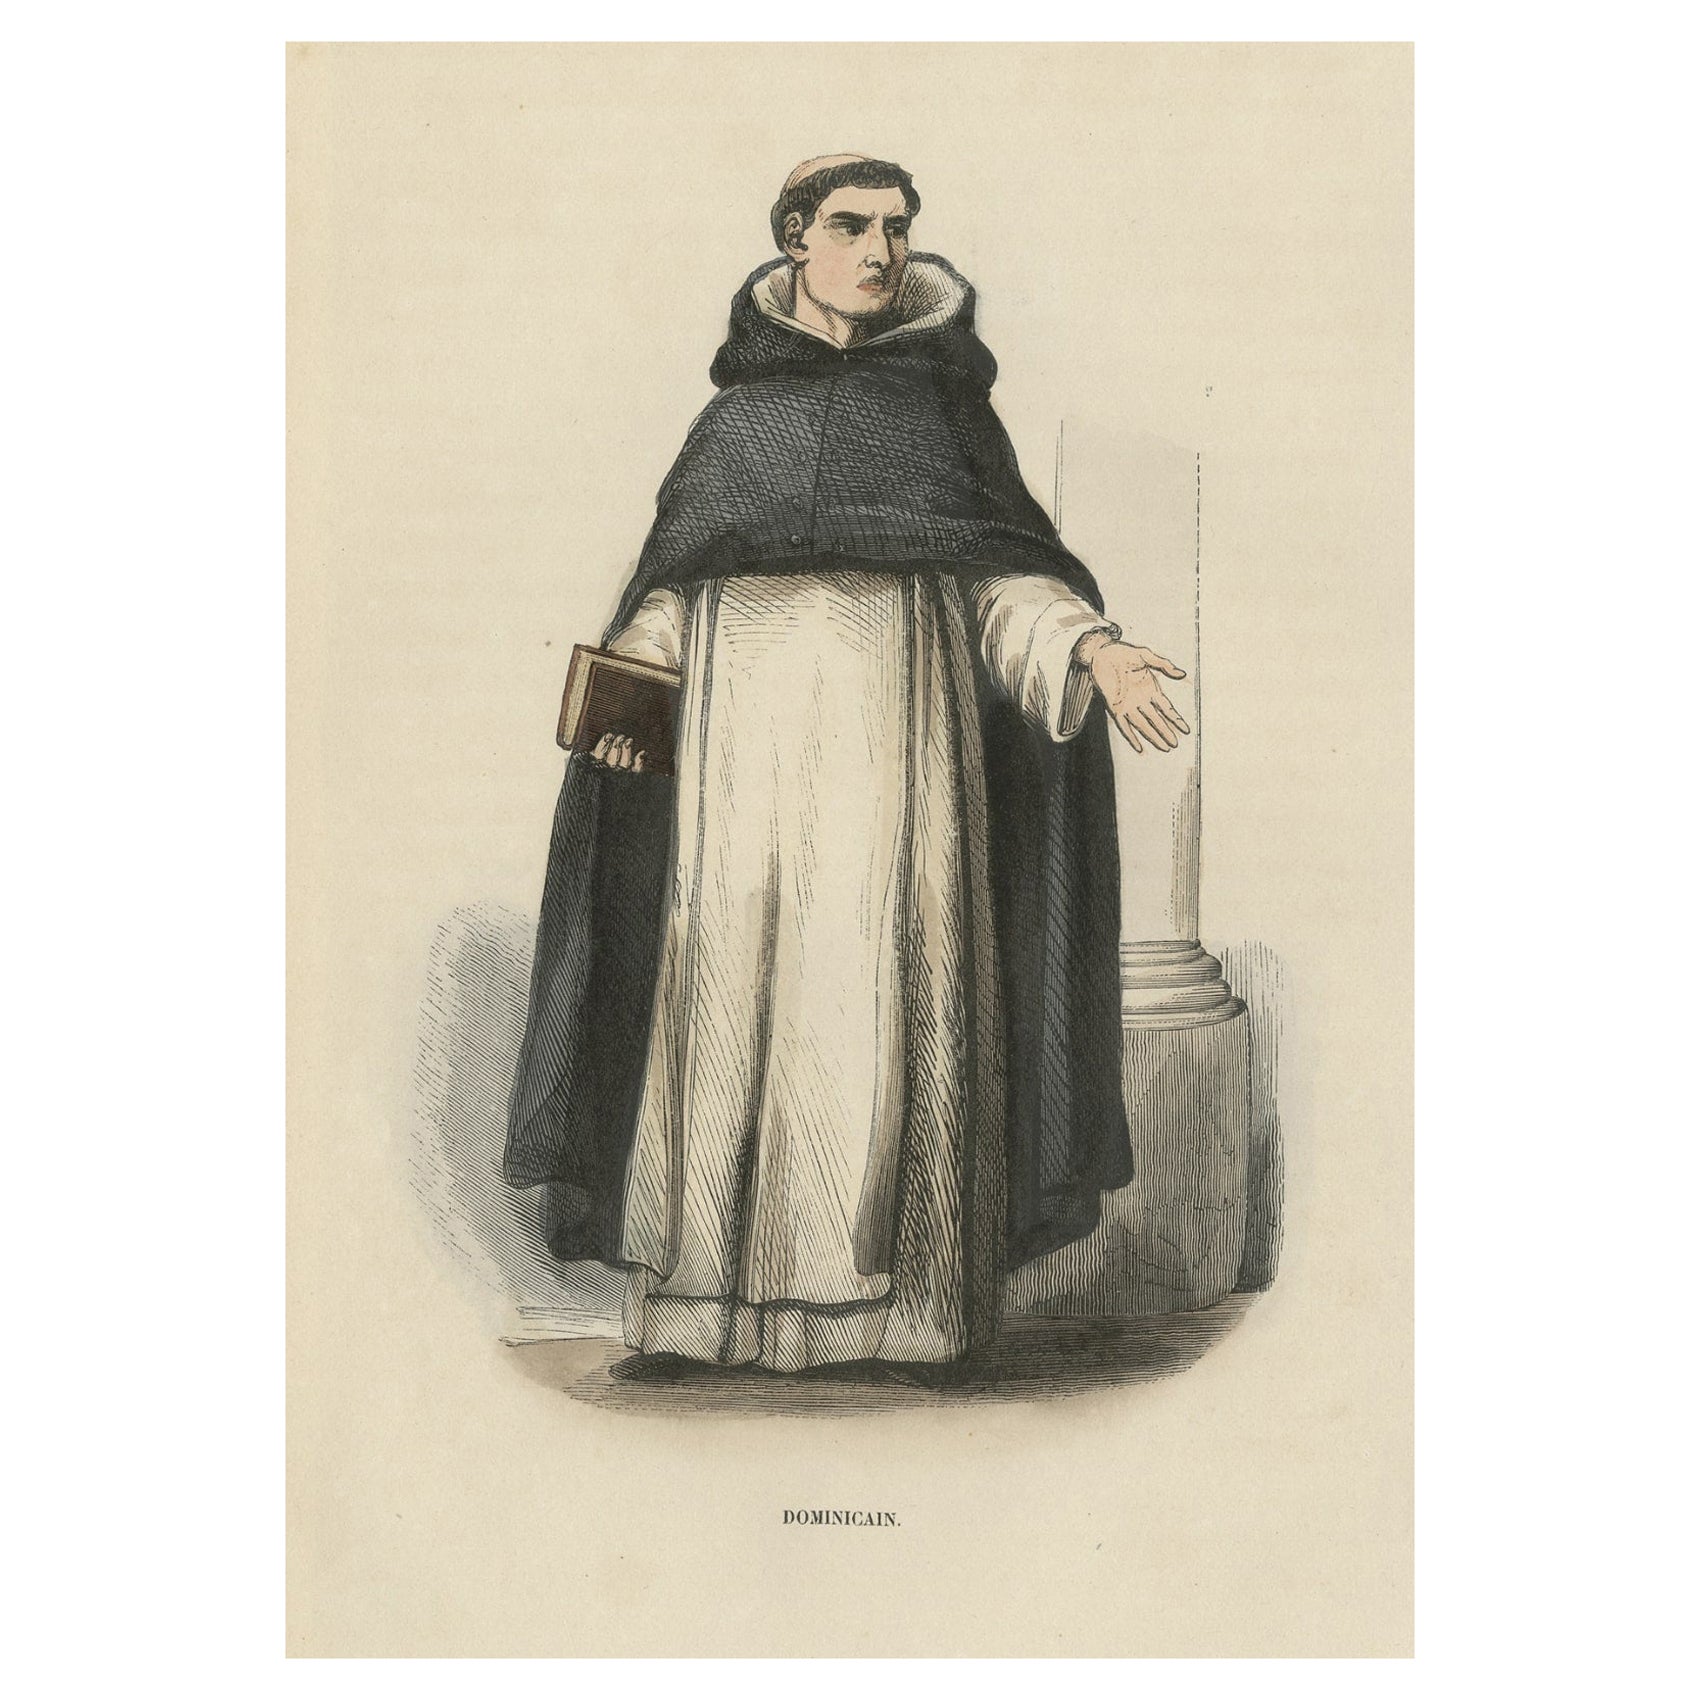 Antique Print of a Dominican Monk, 1845